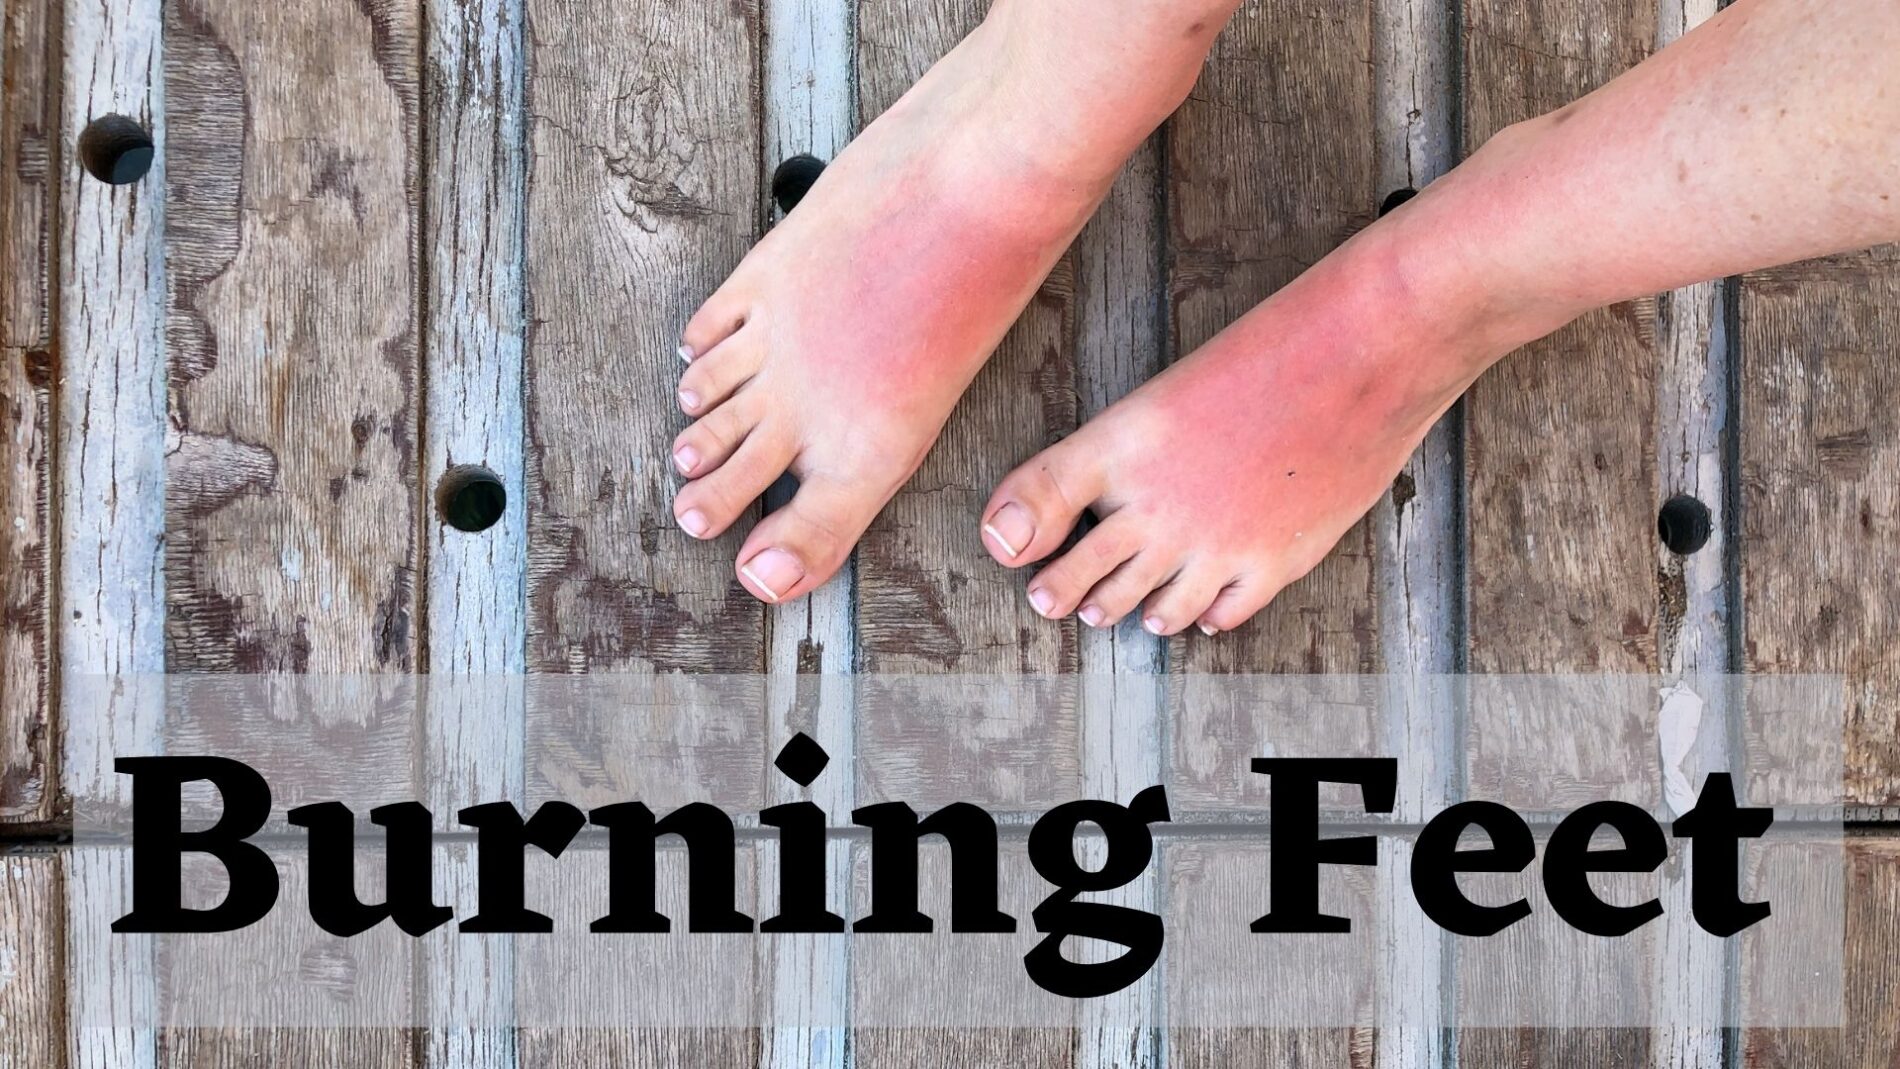 Painful, tingling or burning toes? Pedorthic treatment can help.